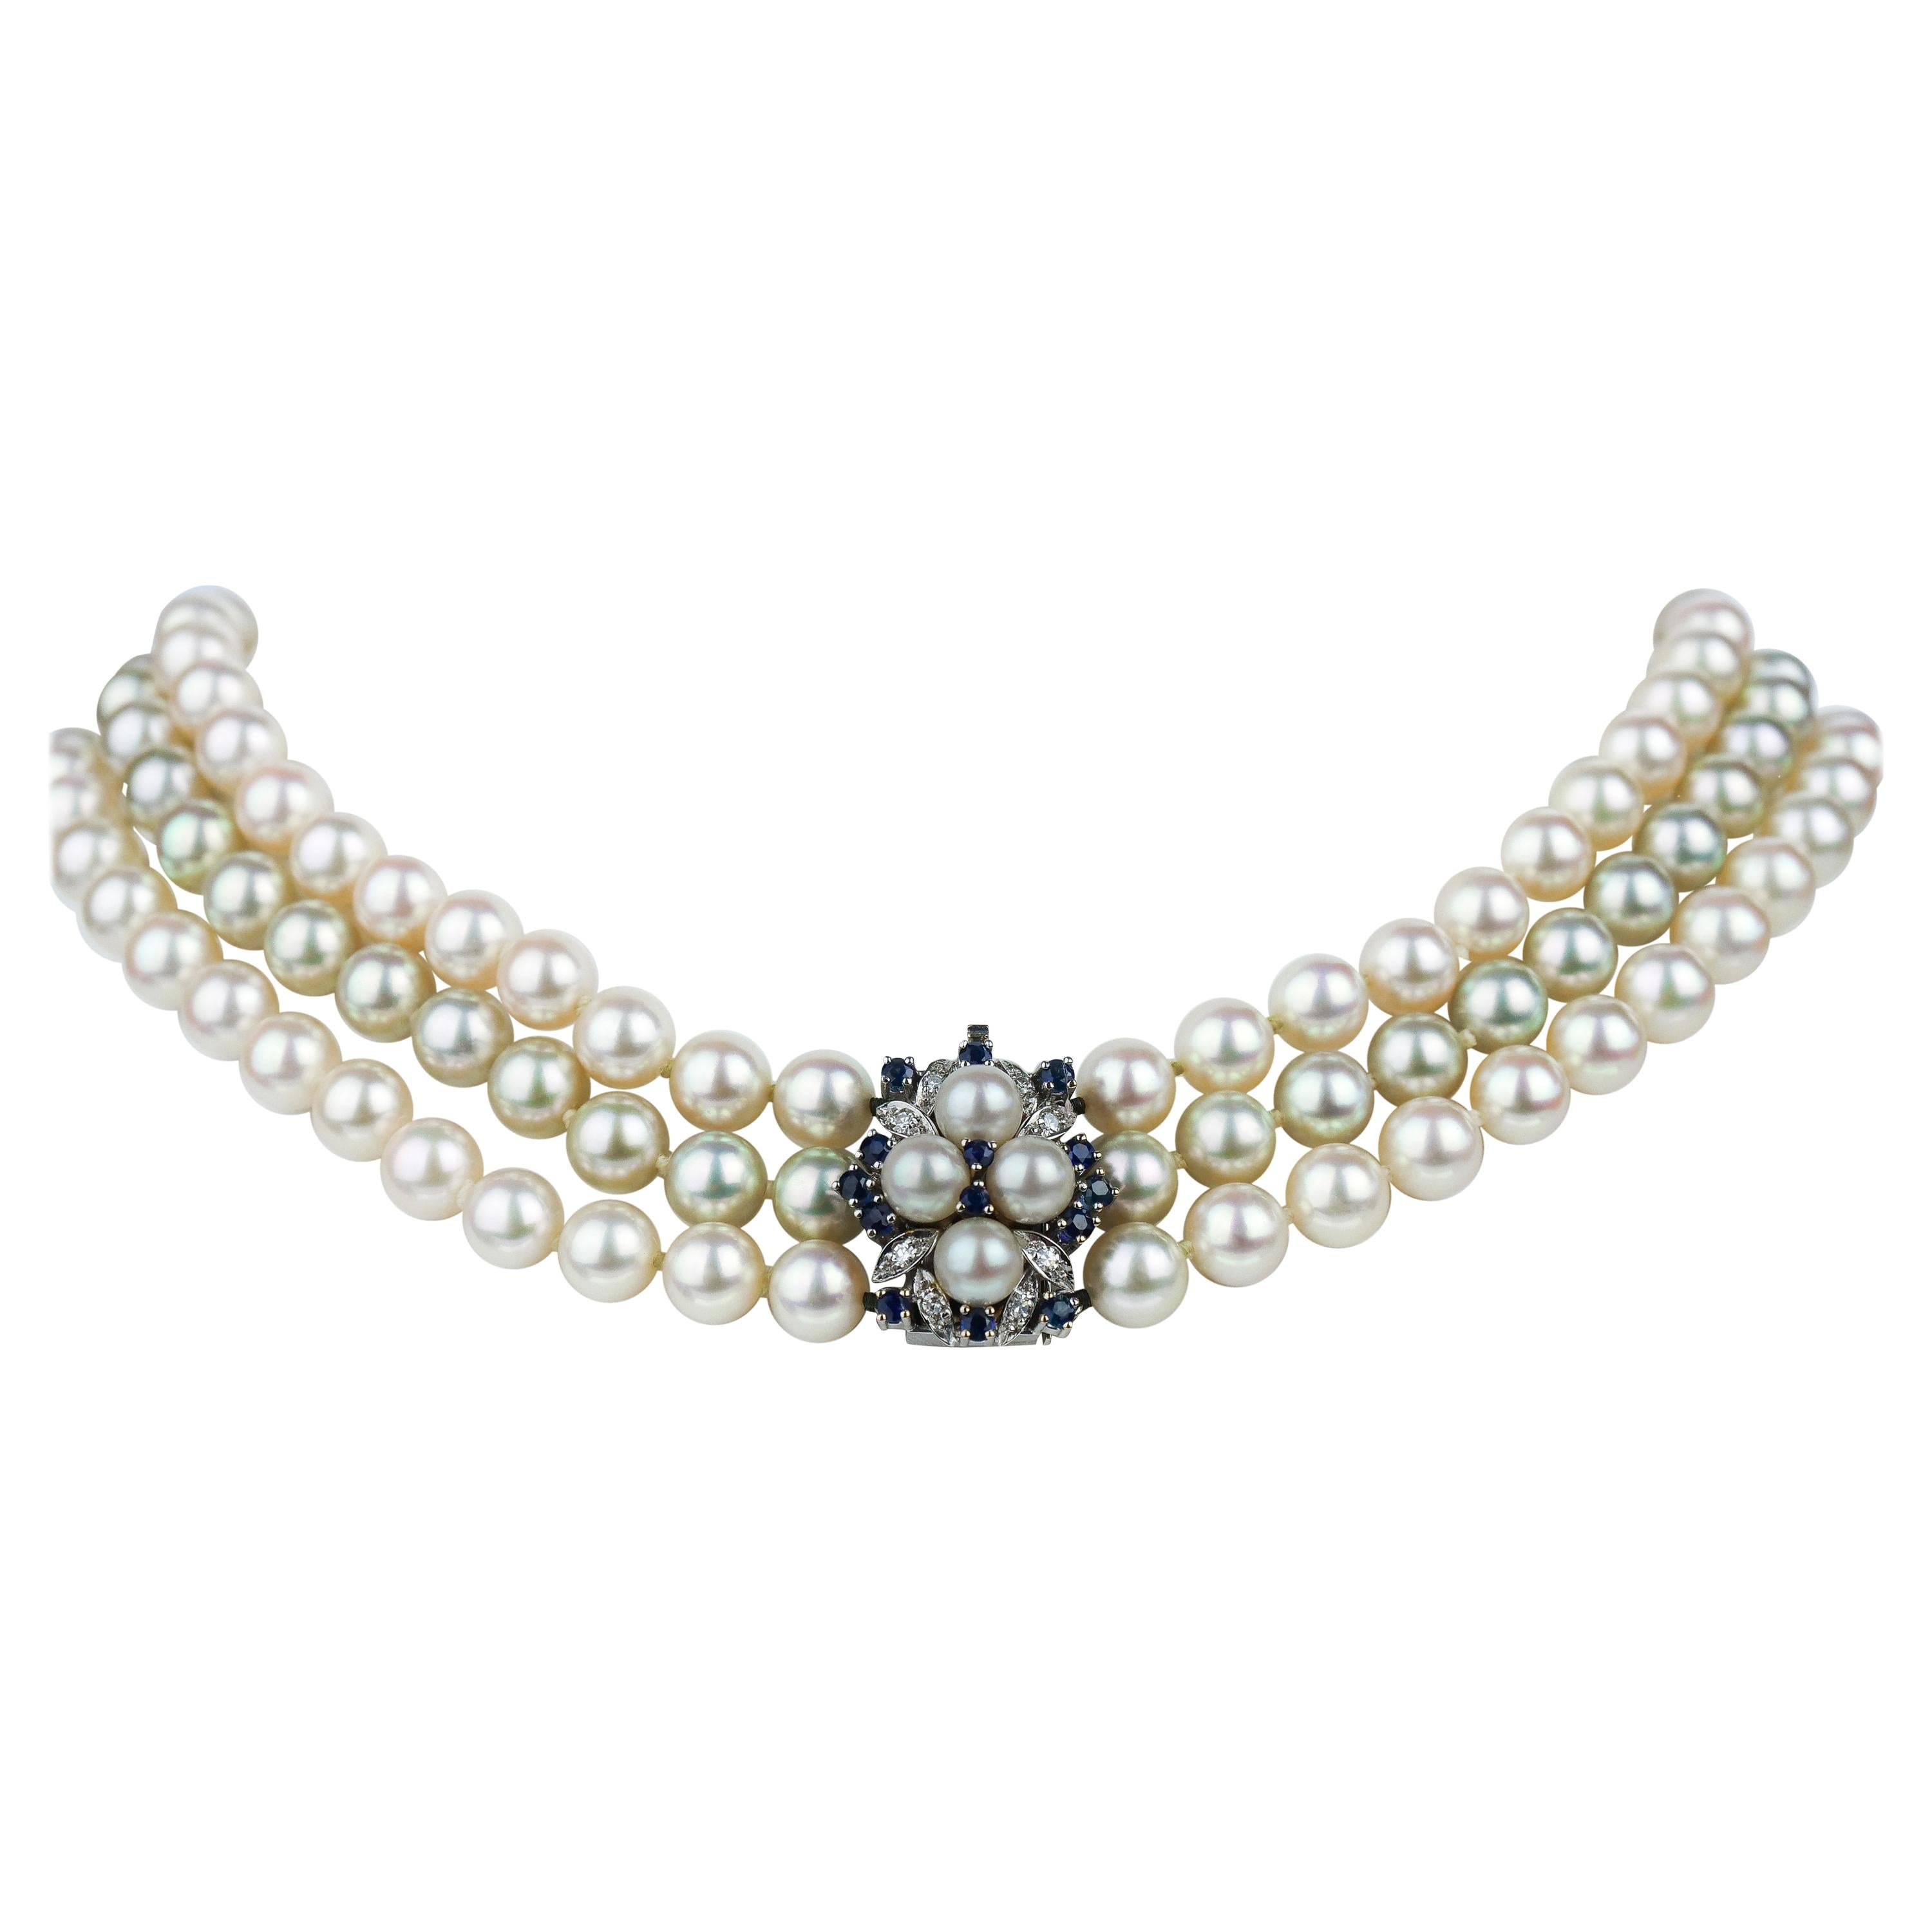 Three Rows Pearl Necklace with Diamond & Sapphire Clasp